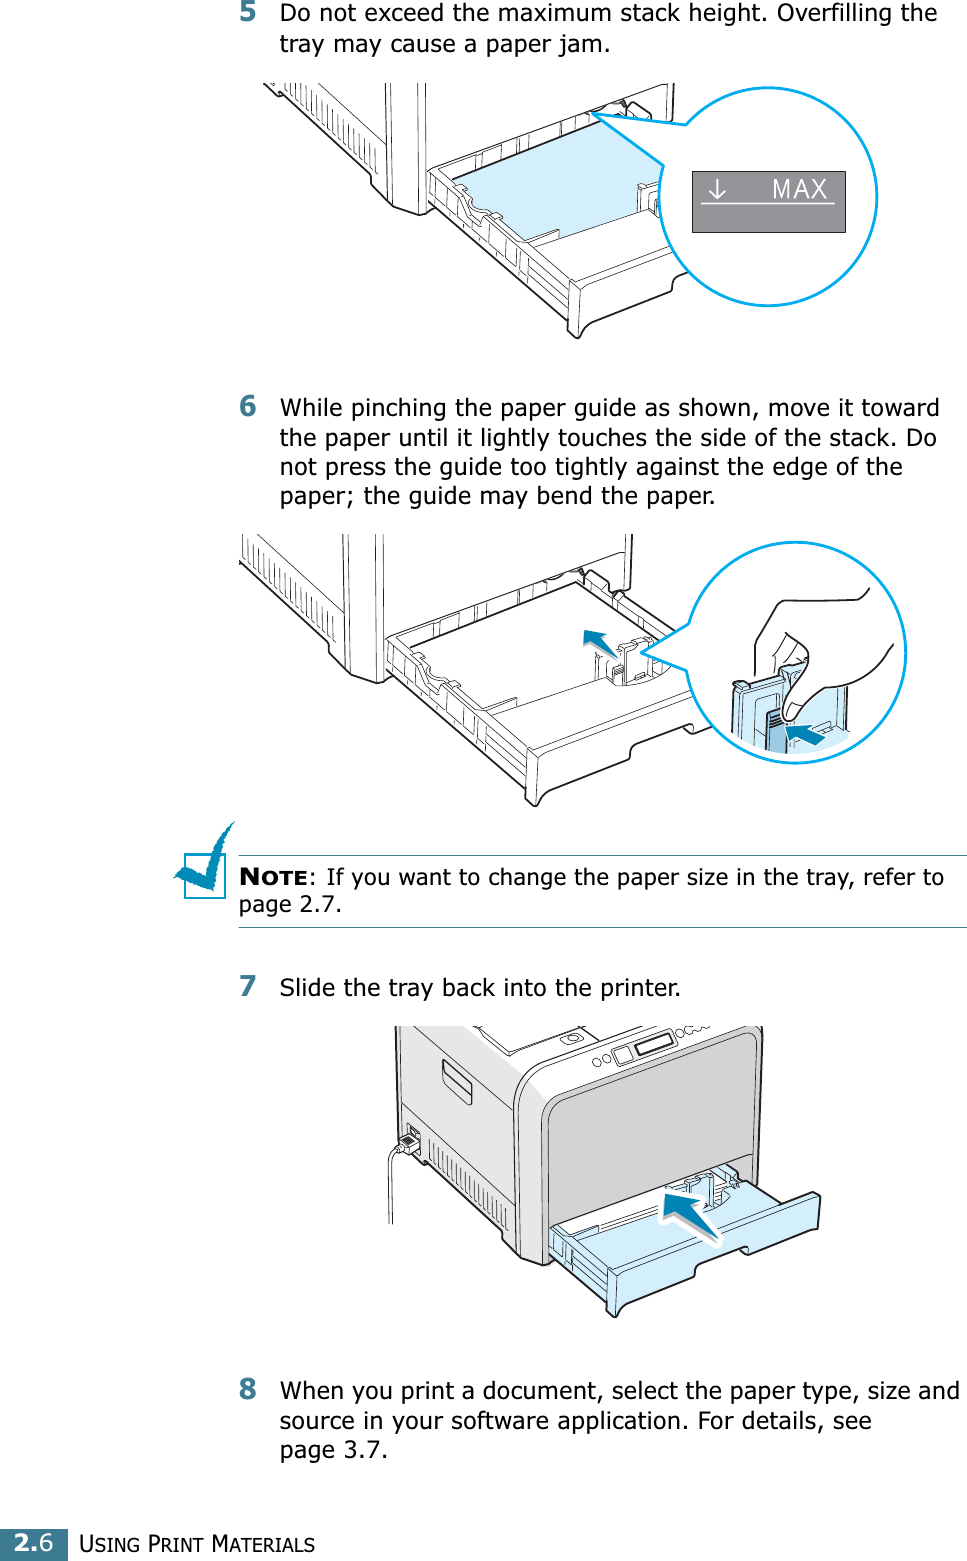 USING PRINT MATERIALS2.65Do not exceed the maximum stack height. Overfilling the tray may cause a paper jam.6While pinching the paper guide as shown, move it toward the paper until it lightly touches the side of the stack. Do not press the guide too tightly against the edge of the paper; the guide may bend the paper. NOTE: If you want to change the paper size in the tray, refer to page 2.7.7Slide the tray back into the printer.8When you print a document, select the paper type, size and source in your software application. For details, see page 3.7.